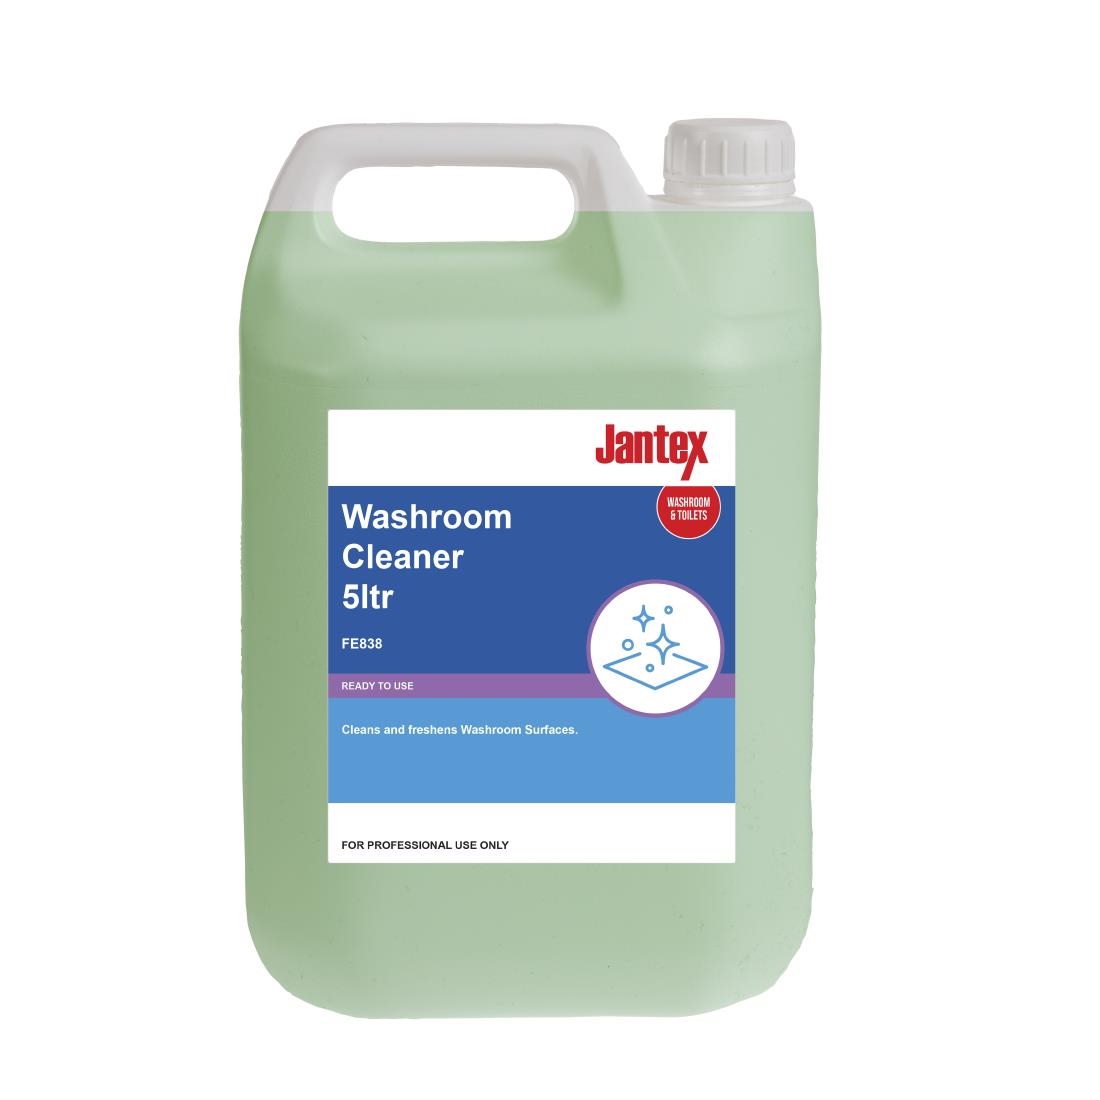 Jantex Washroom Cleaner Ready To Use 5Ltr